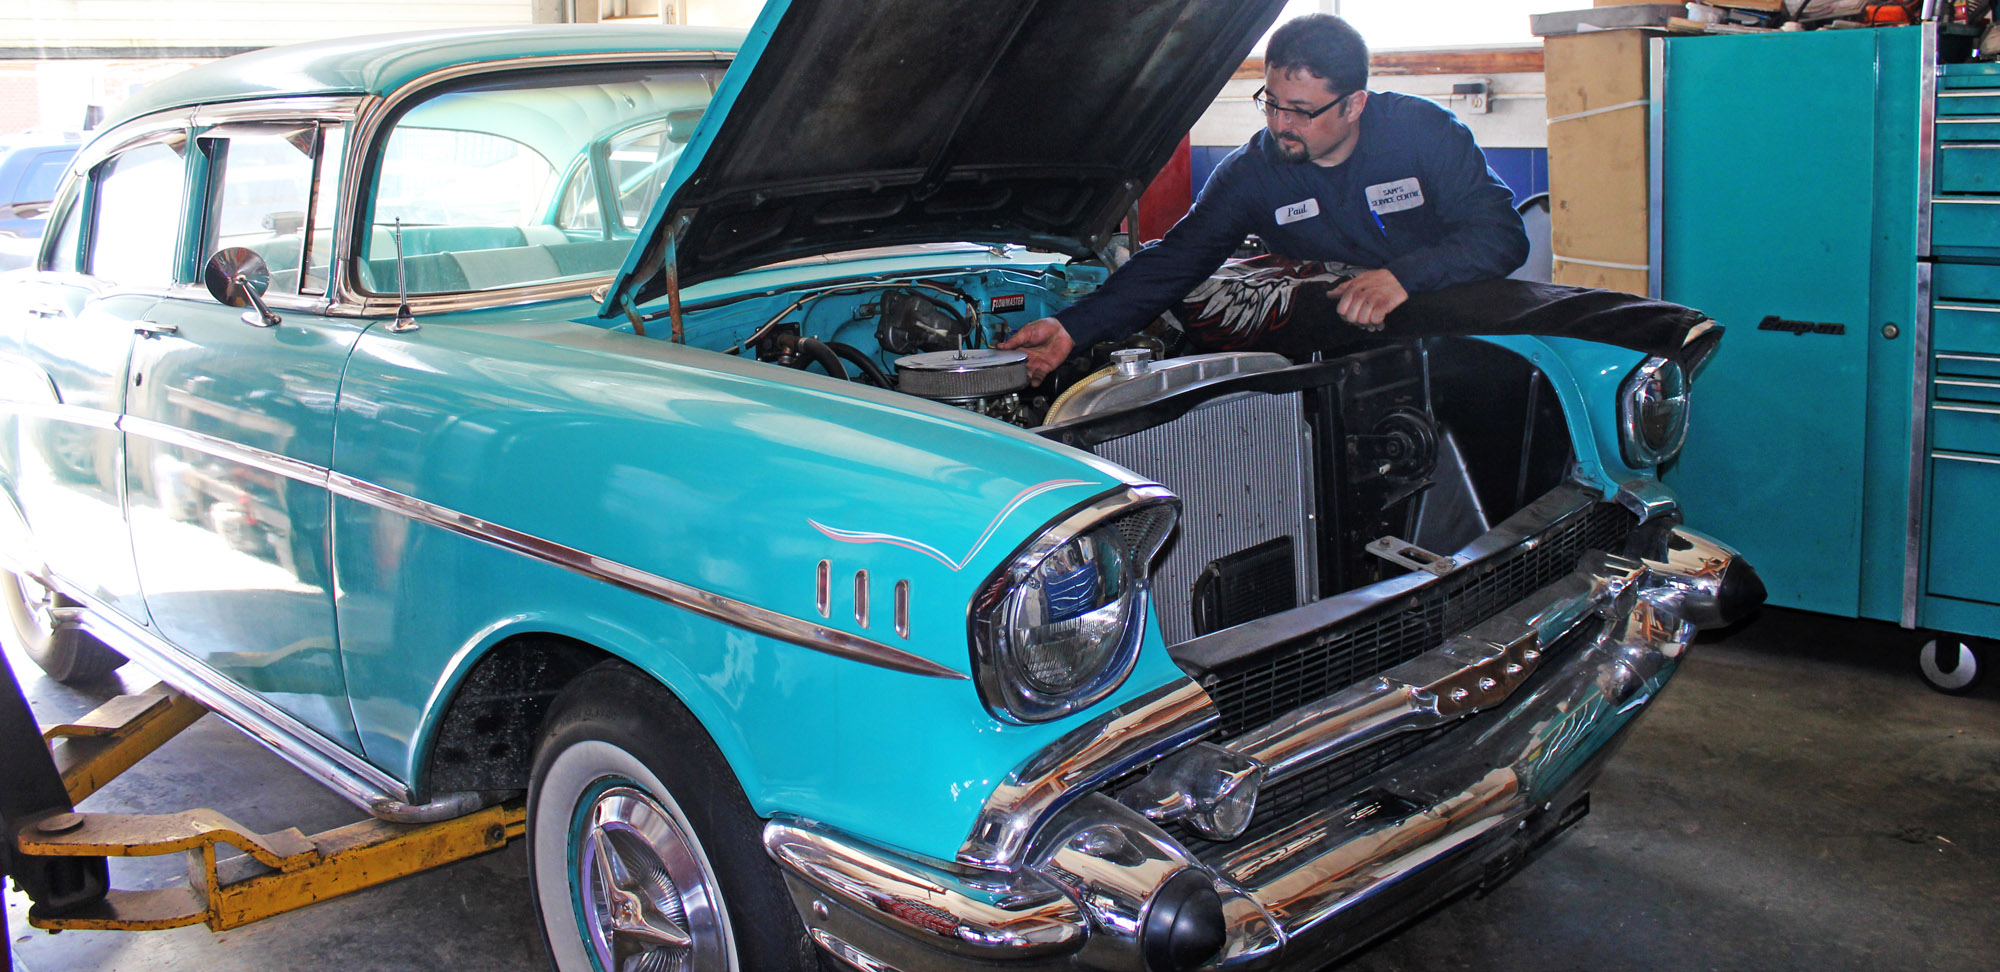 Paul from Sam's Service Centre working on the engine of a '57 Chevy, a restoration project